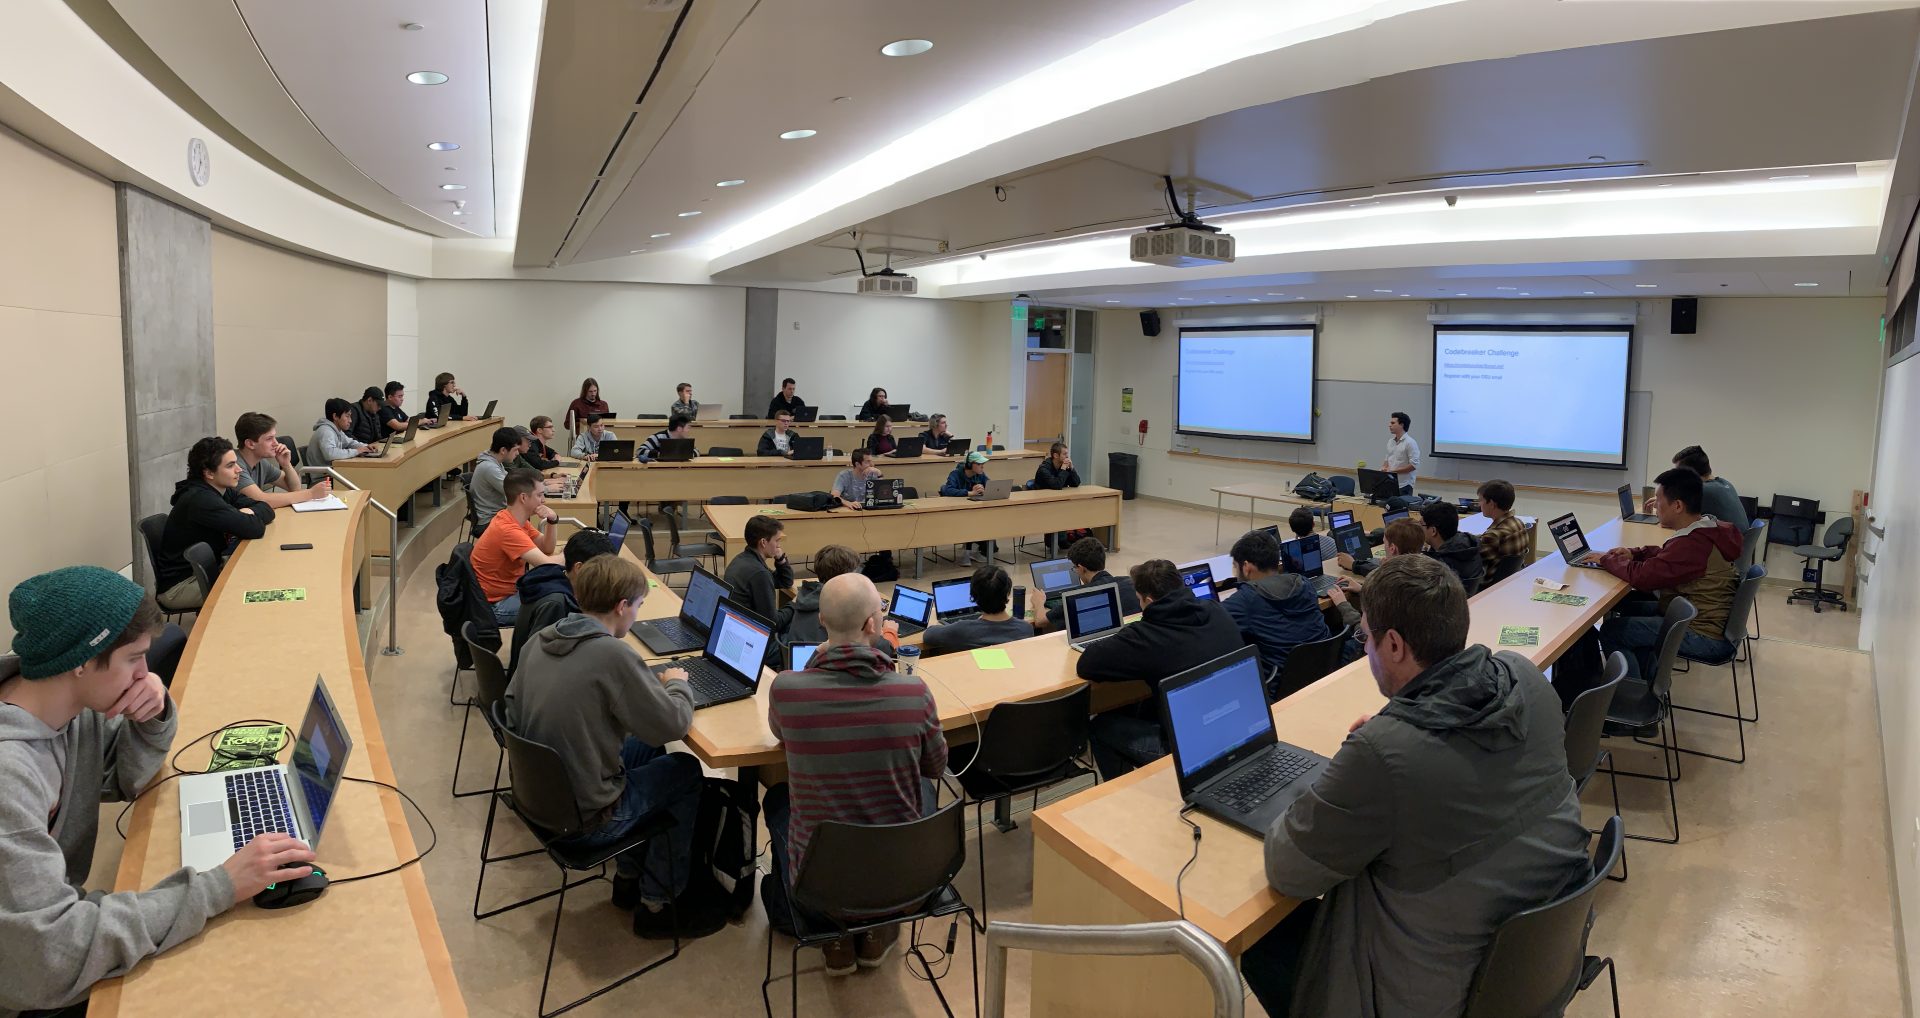 Photo of classroom full of students, many of which have laptops out